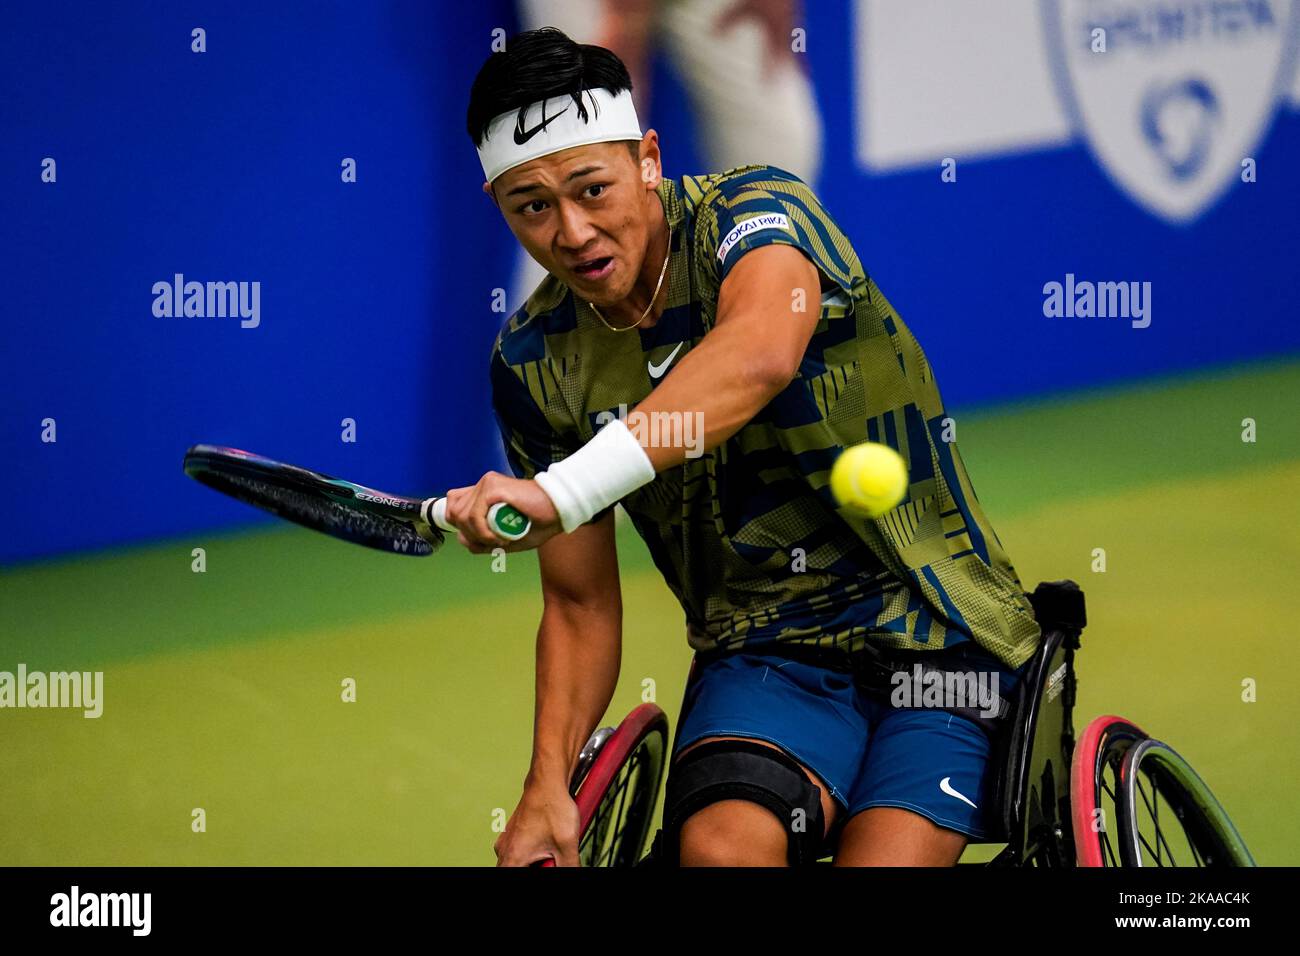 OSS, NETHERLANDS - NOVEMBER 1: Tokito Oda of Japan plays a backhand in his match against Alfie Hewett of Great Britain during Day 3 of the 2022 ITF Wheelchair Tennis Masters at Sportcentrum de Rusheuvel on November 1, 2022 in Oss, Netherlands (Photo by Rene Nijhuis/Orange Pictures) Stock Photo